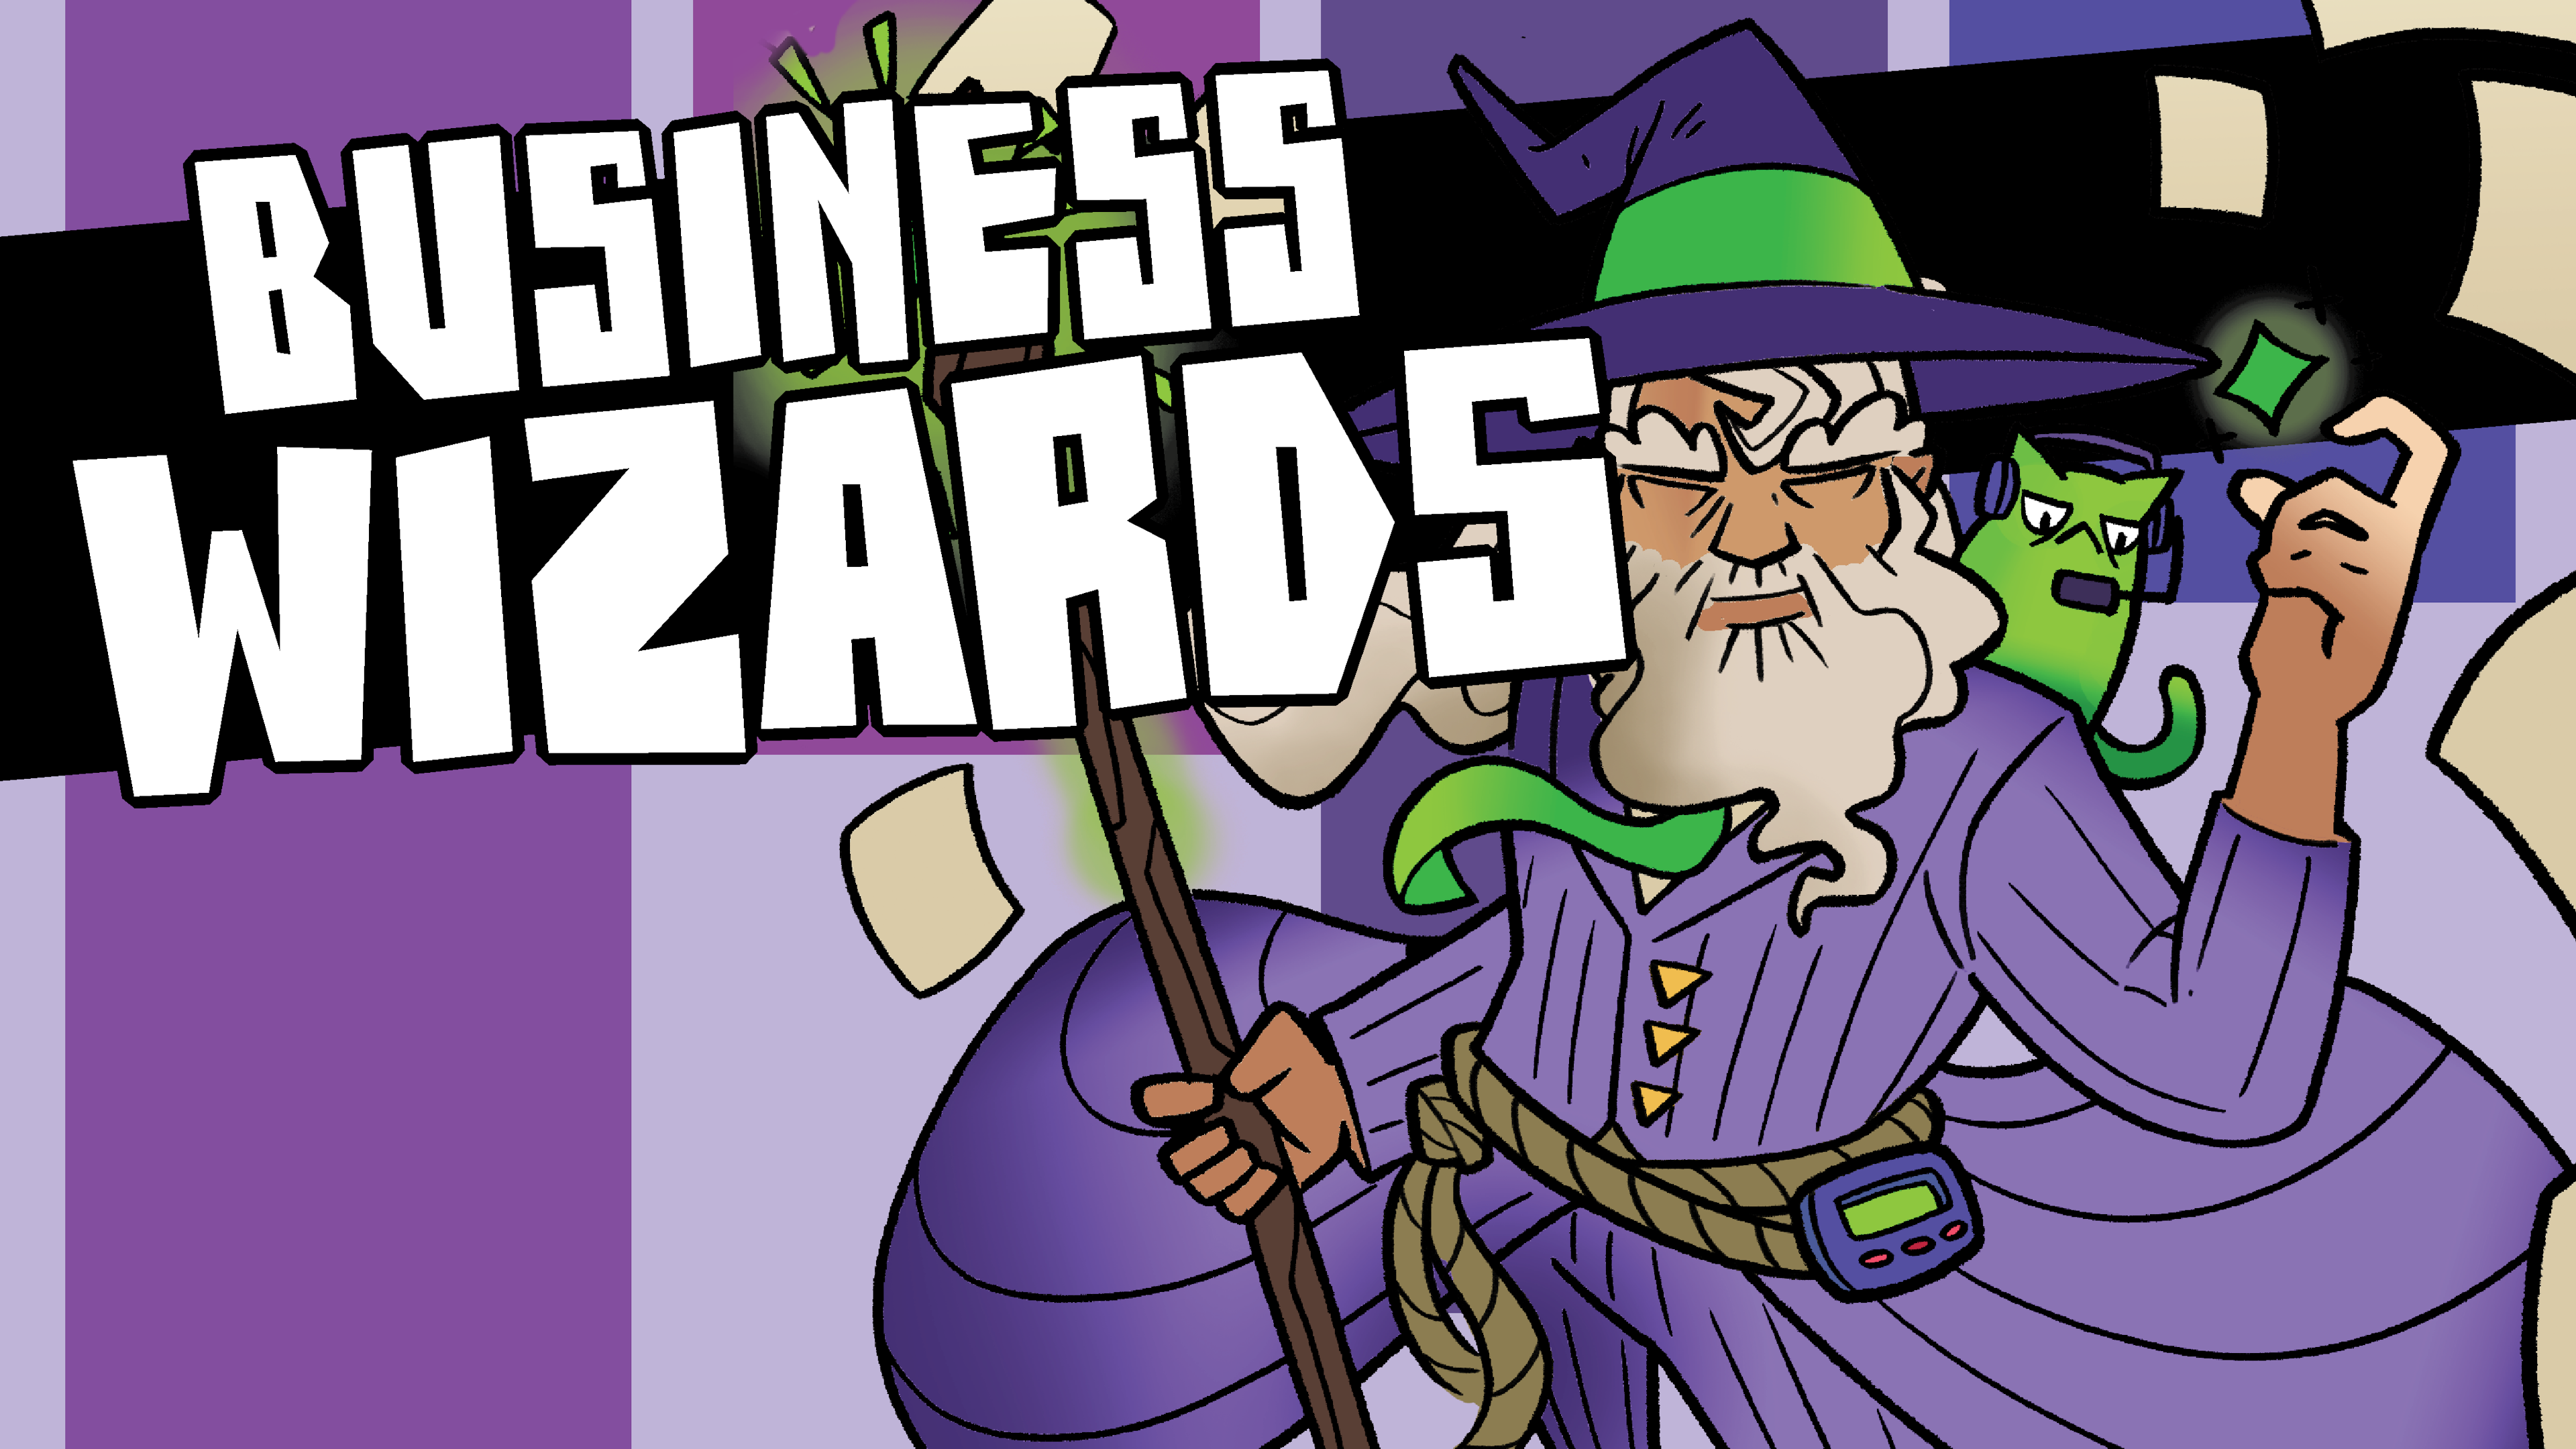 Business Wizards: One Gig to Rule Them All - Episodic Indie RPG One-Shot